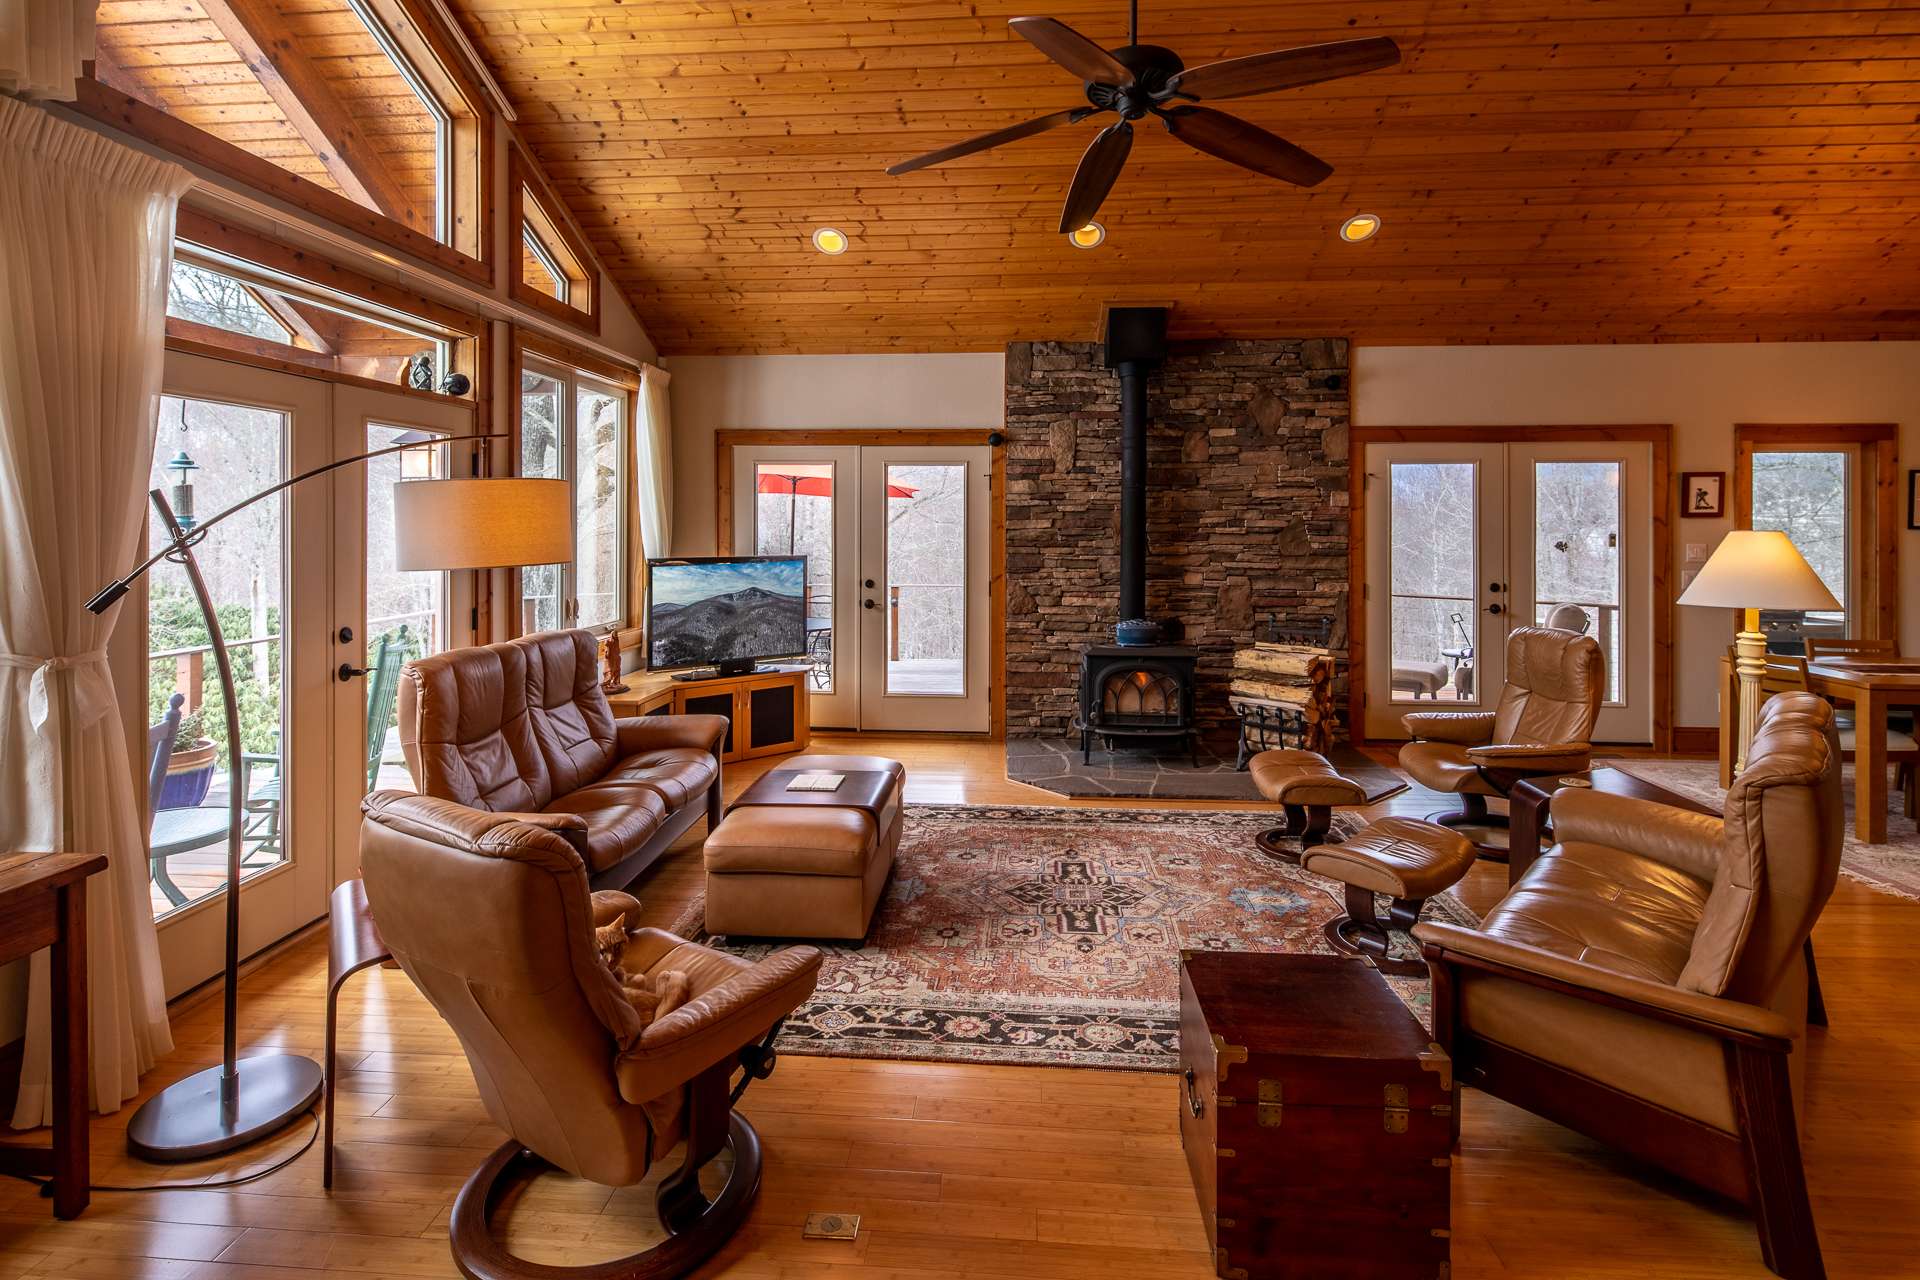 Features include vaulted T&G ceiling, bamboo flooring and efficient Jotul wood stove accented by stacked stone wall.